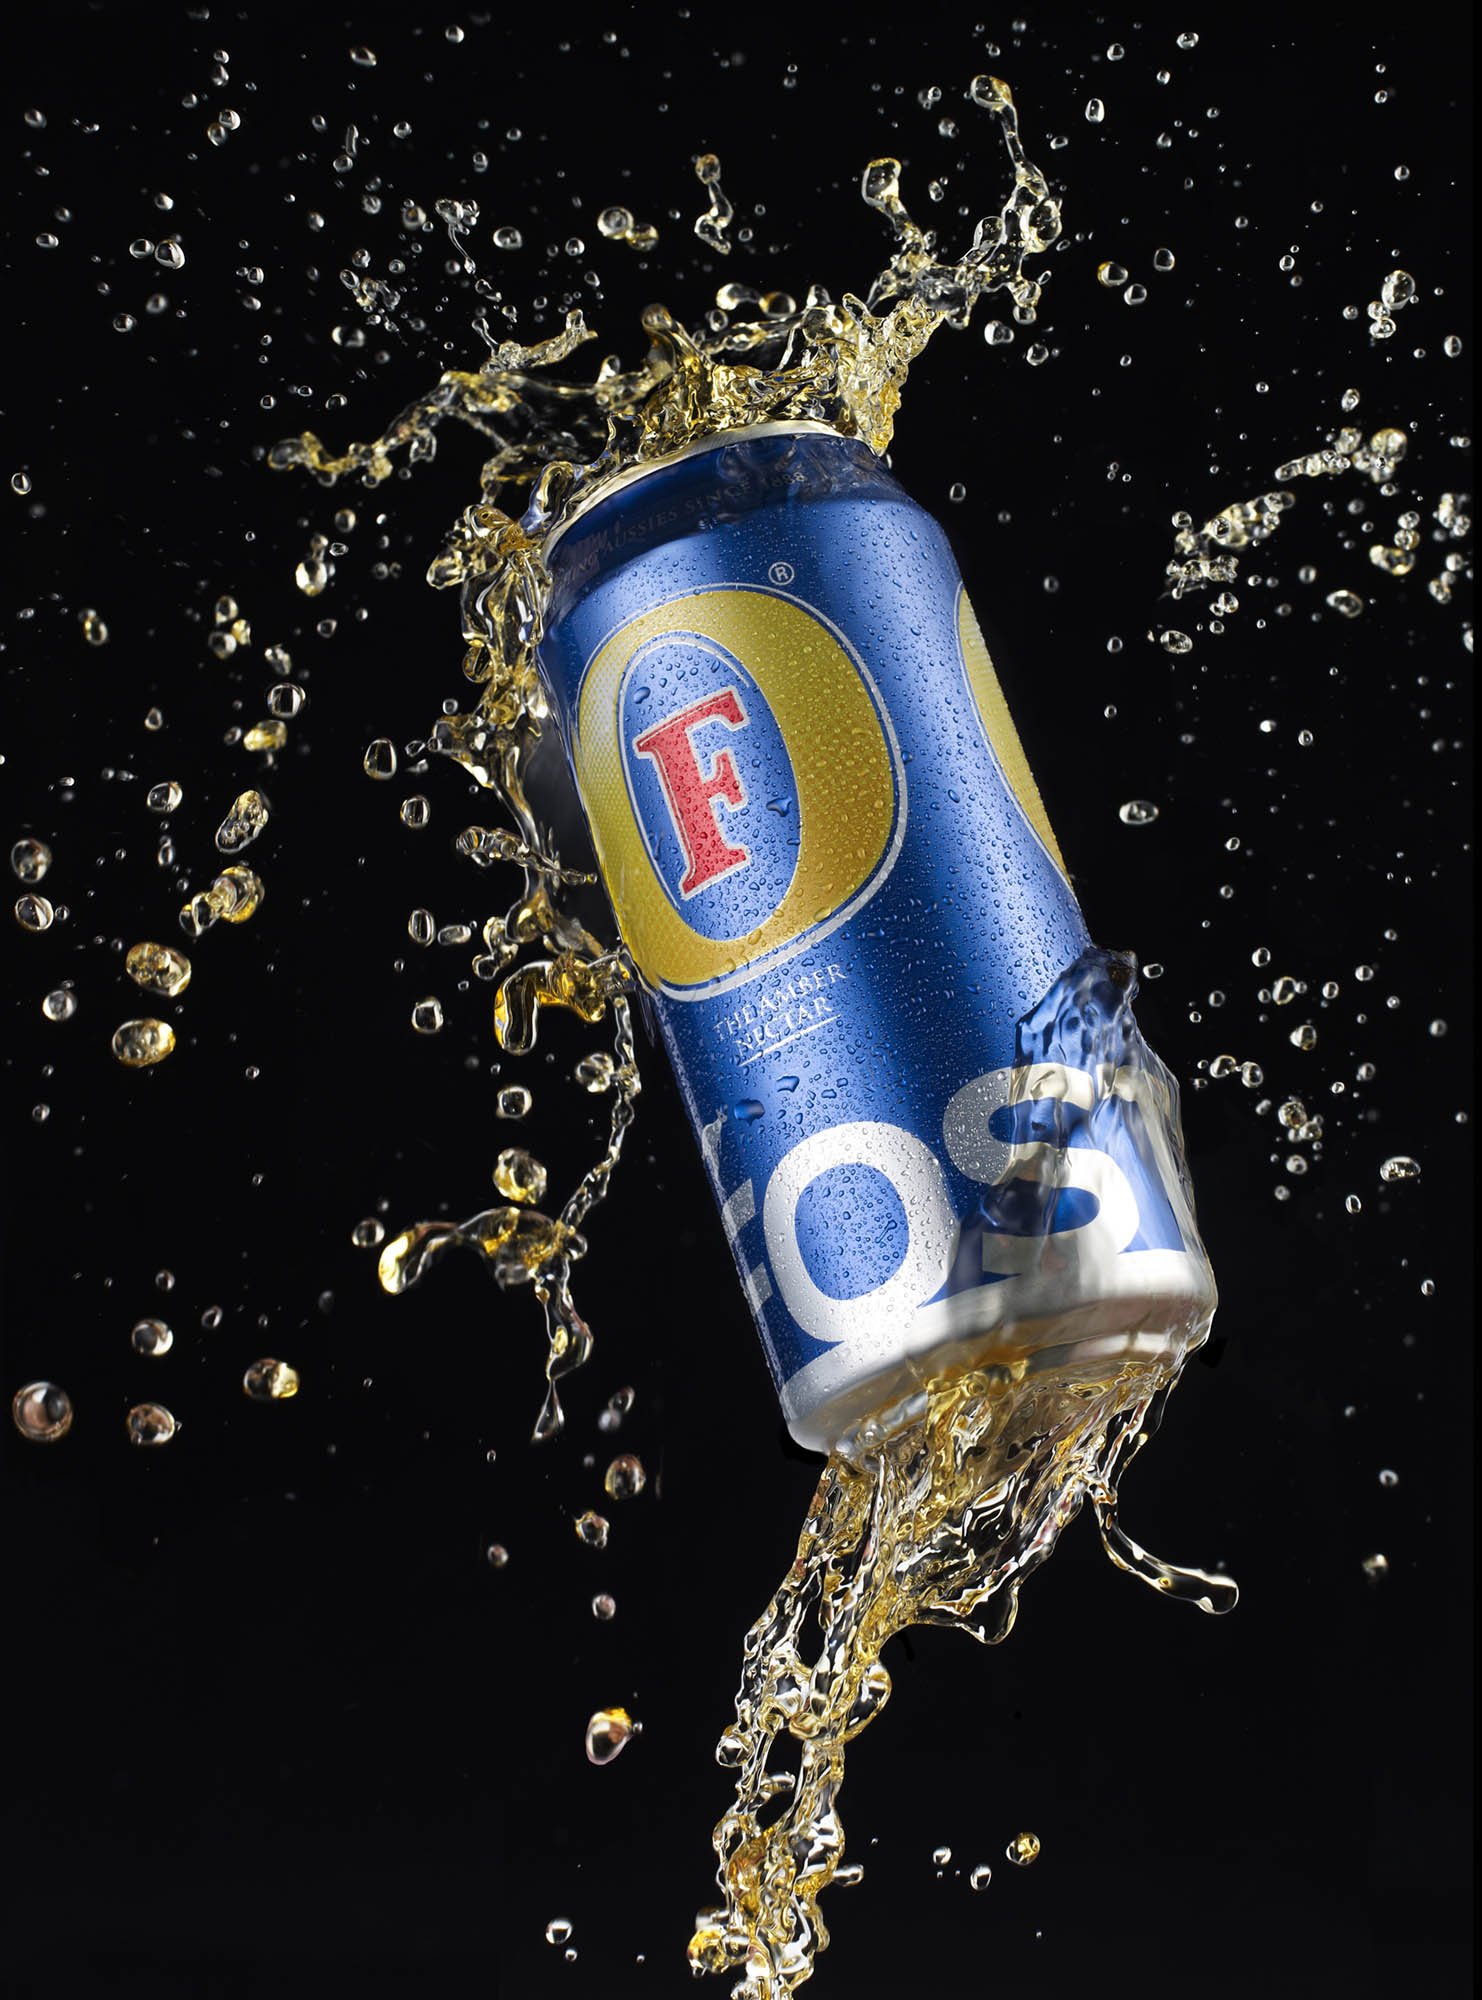 Flying can of Fosters